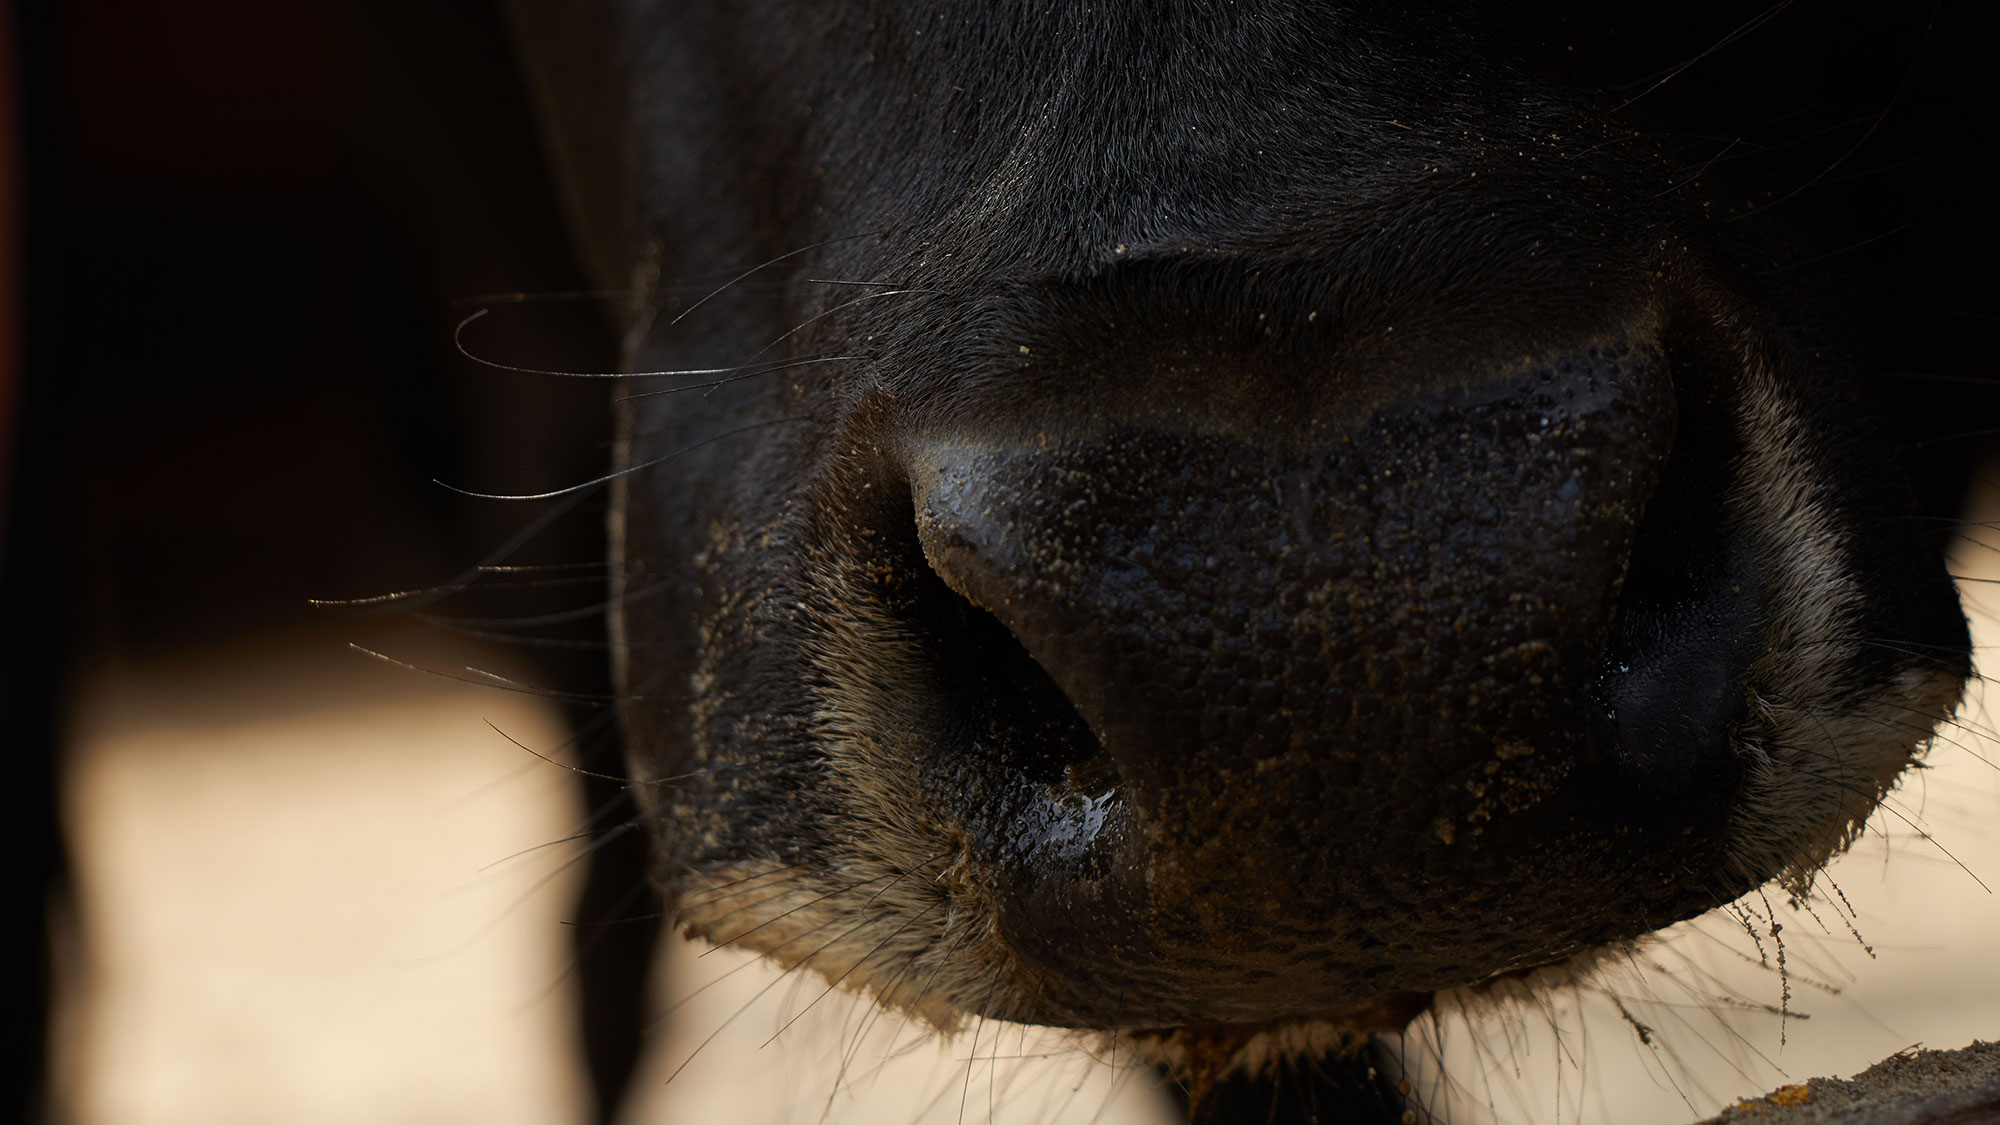 Face and nose of a black cow.